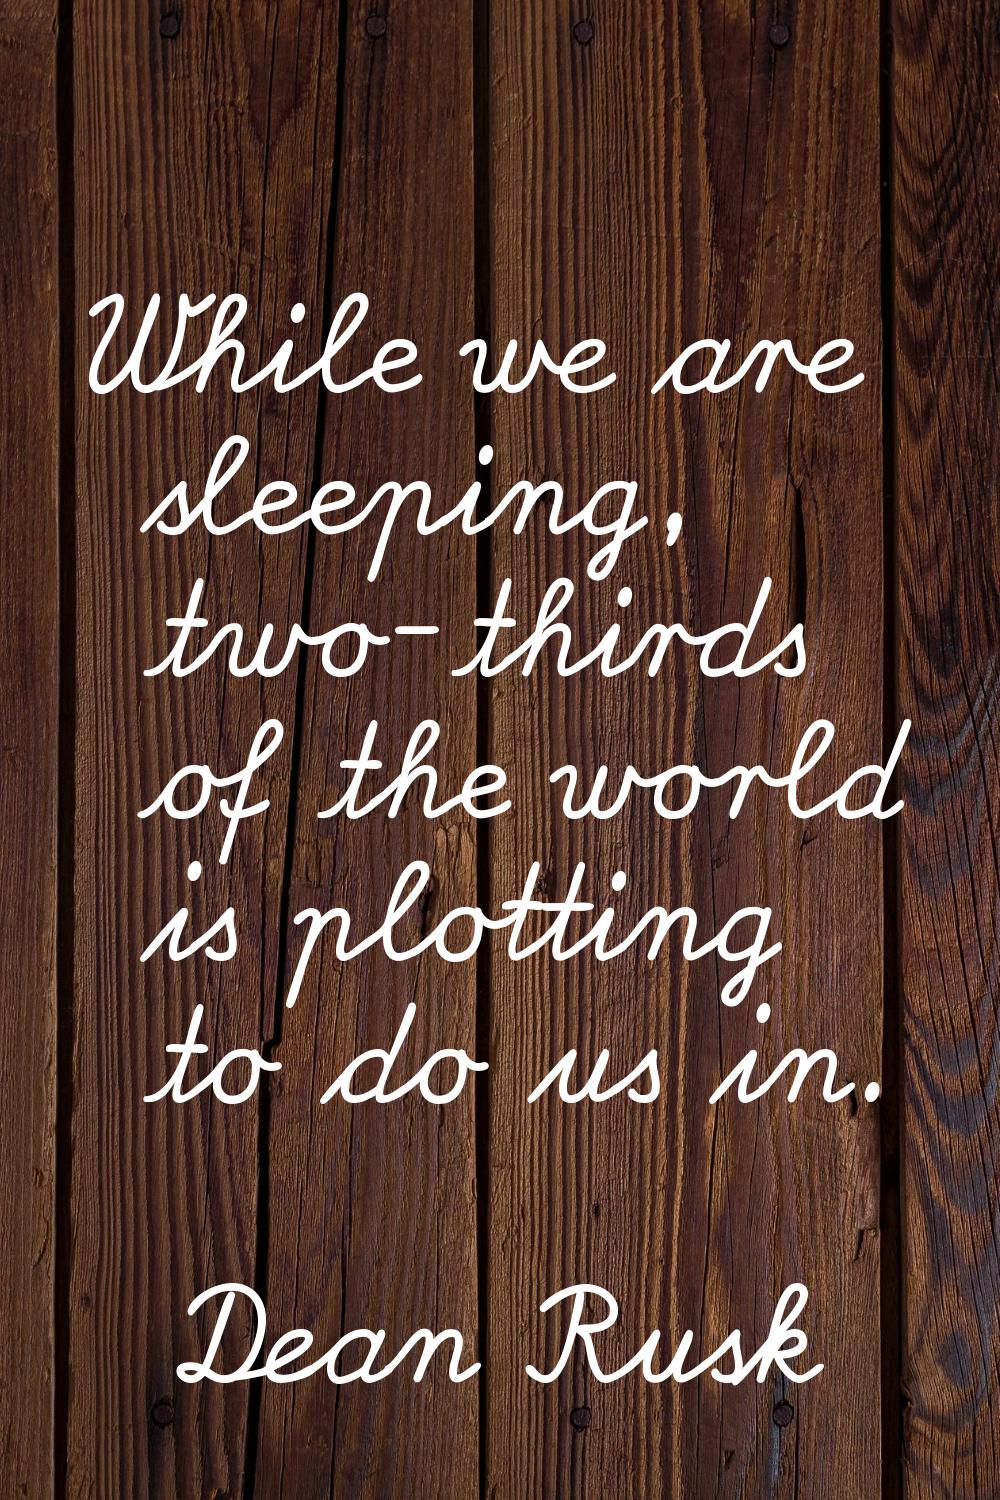 While we are sleeping, two-thirds of the world is plotting to do us in.